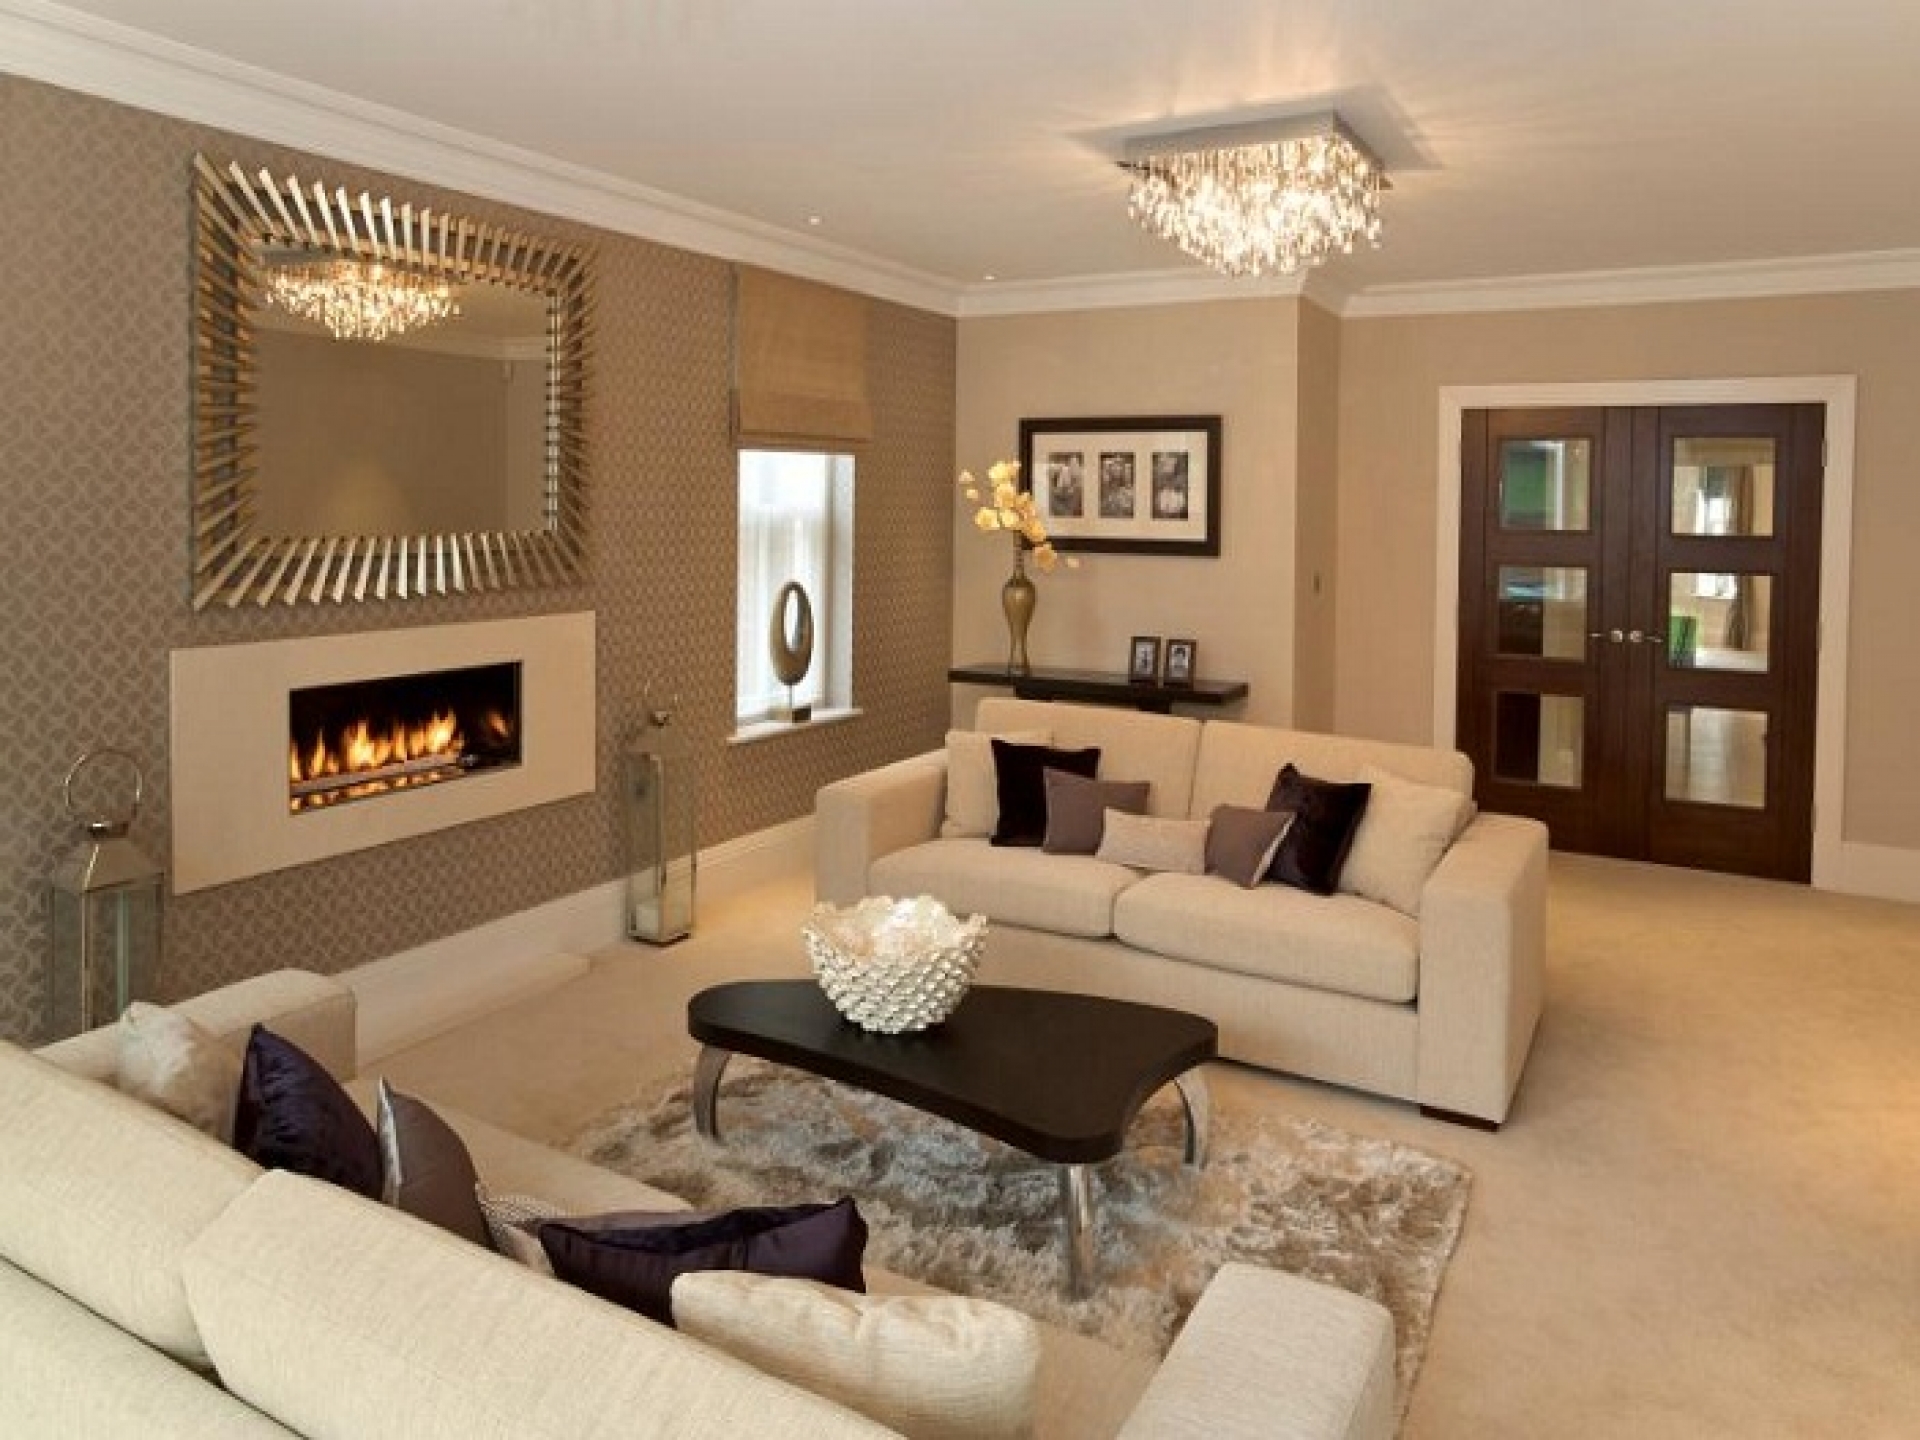 Luxury Home Lighting Design: Creating The Perfect Ambiance For Every Room